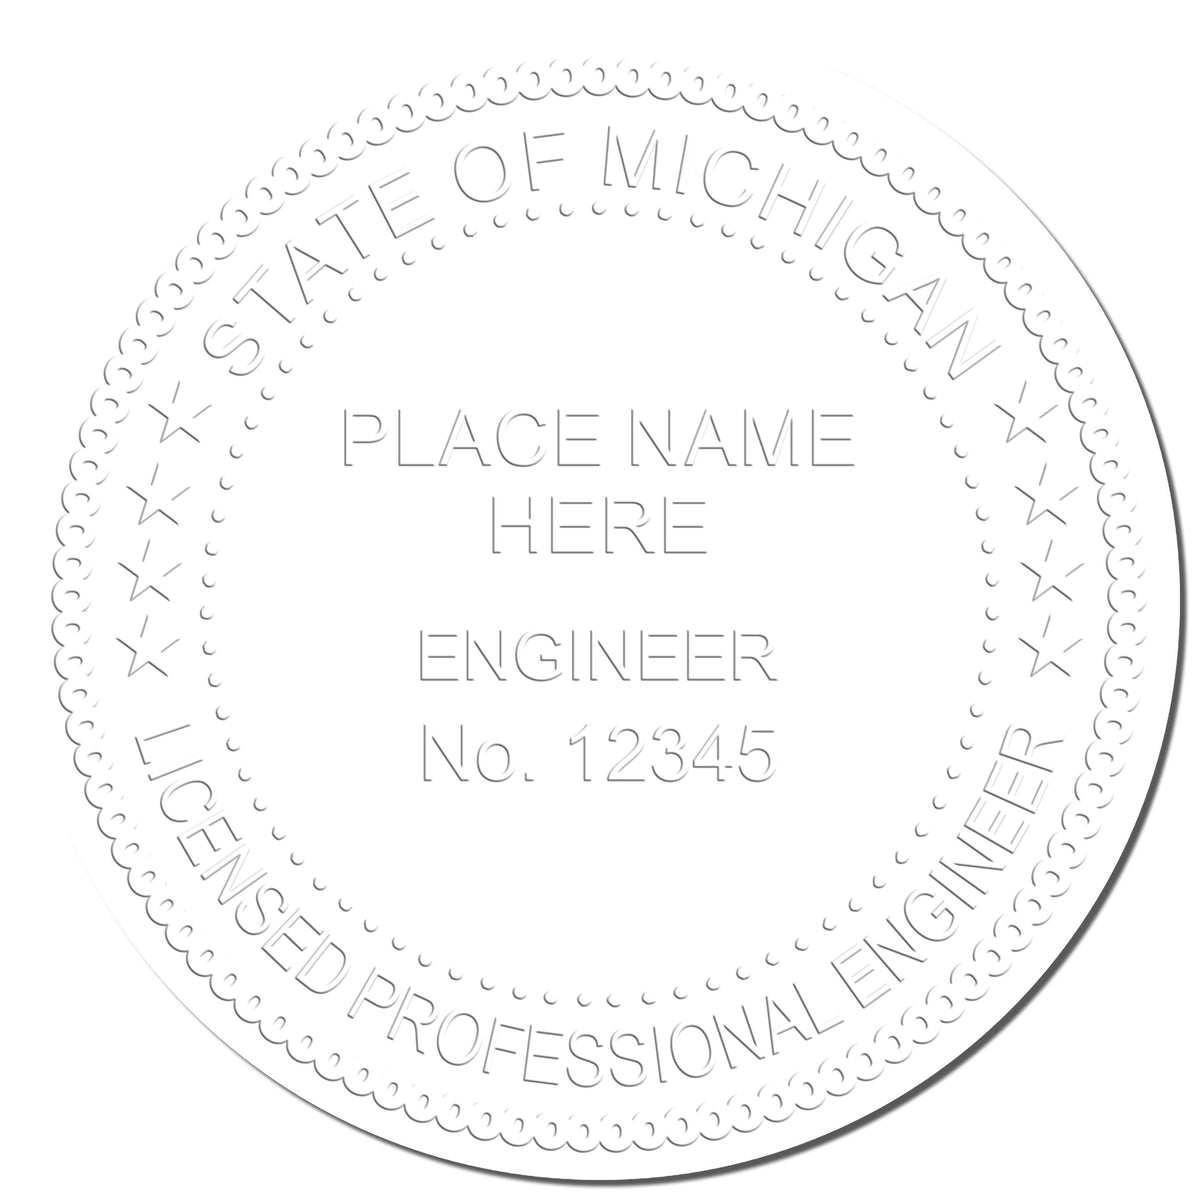 This paper is stamped with a sample imprint of the Hybrid Michigan Engineer Seal, signifying its quality and reliability.